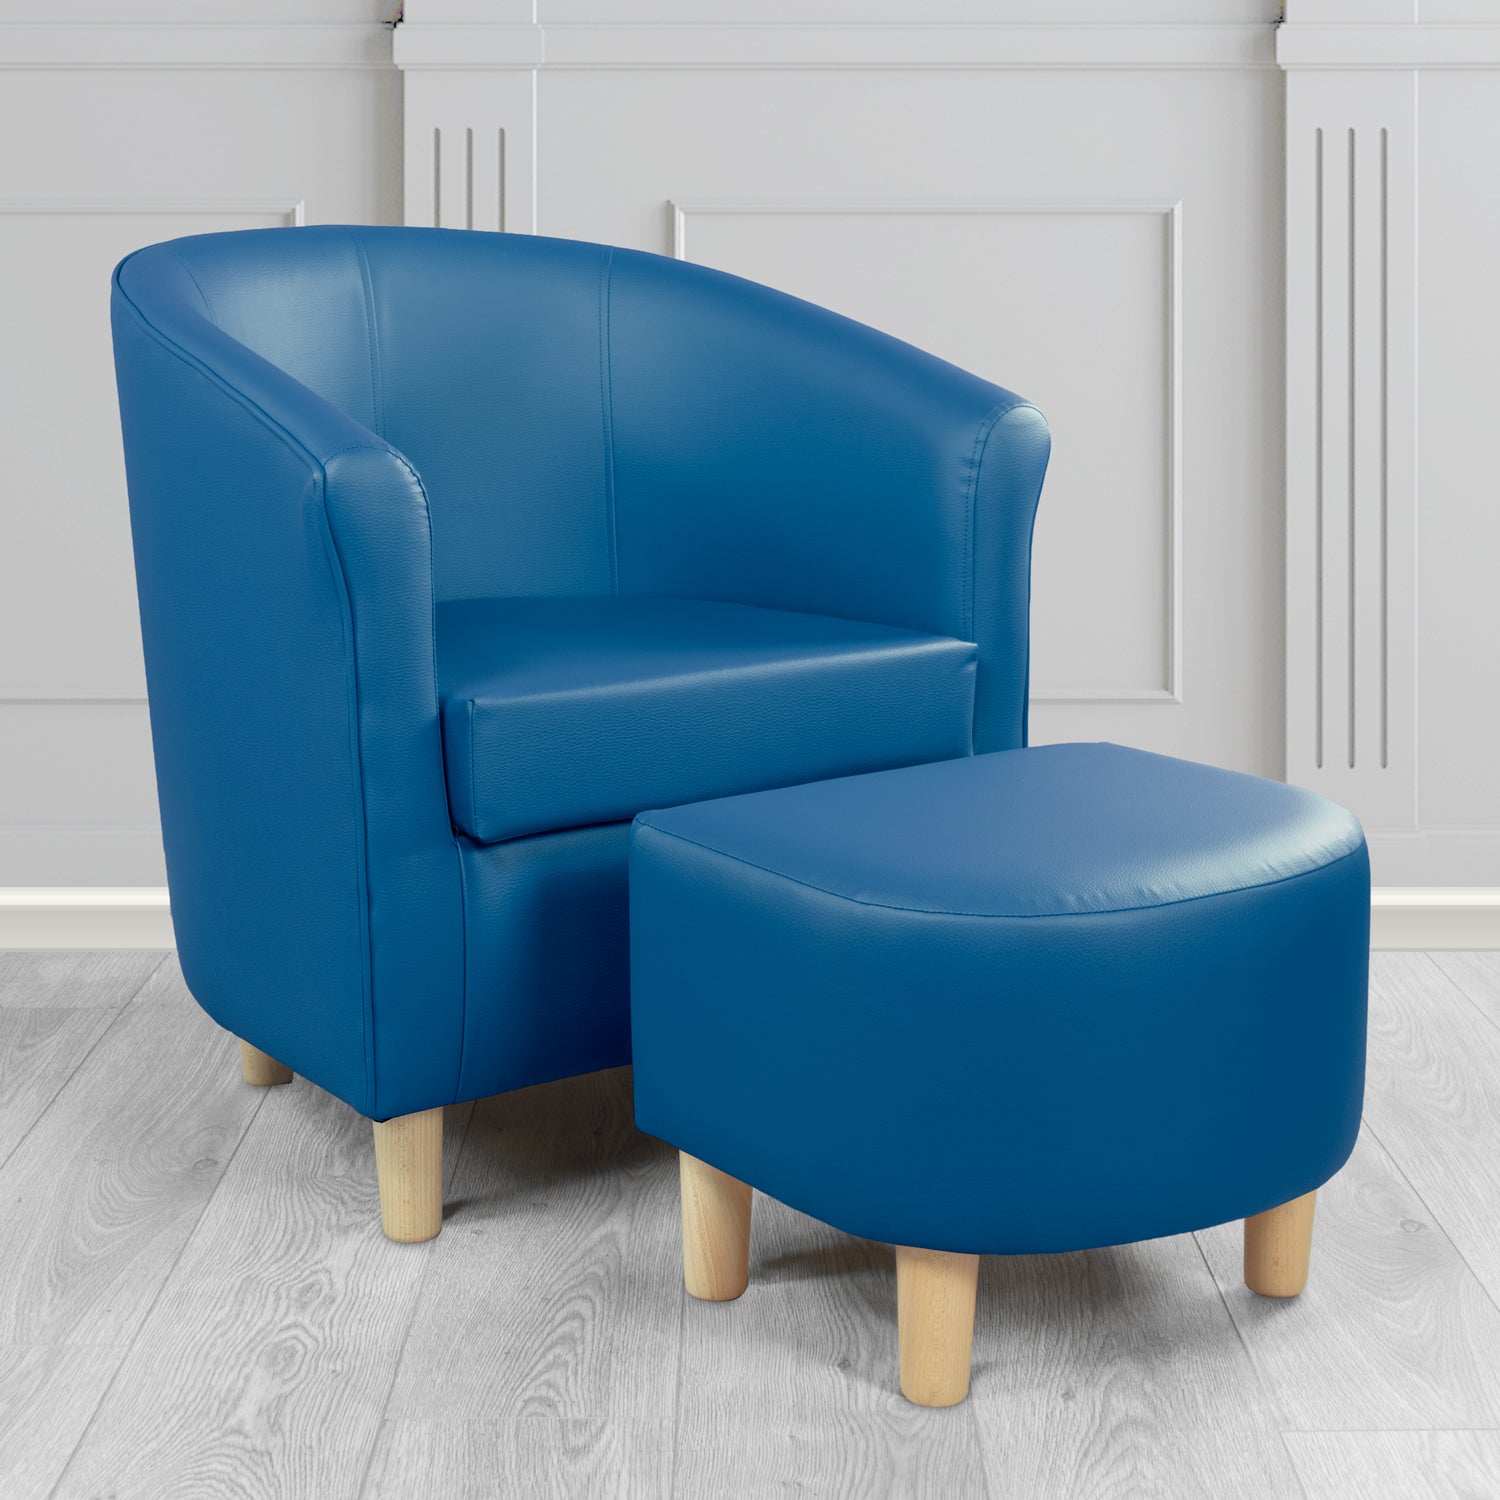 Tuscany Tub Chair with Footstool Set in Madrid Royal Faux Leather - The Tub Chair Shop